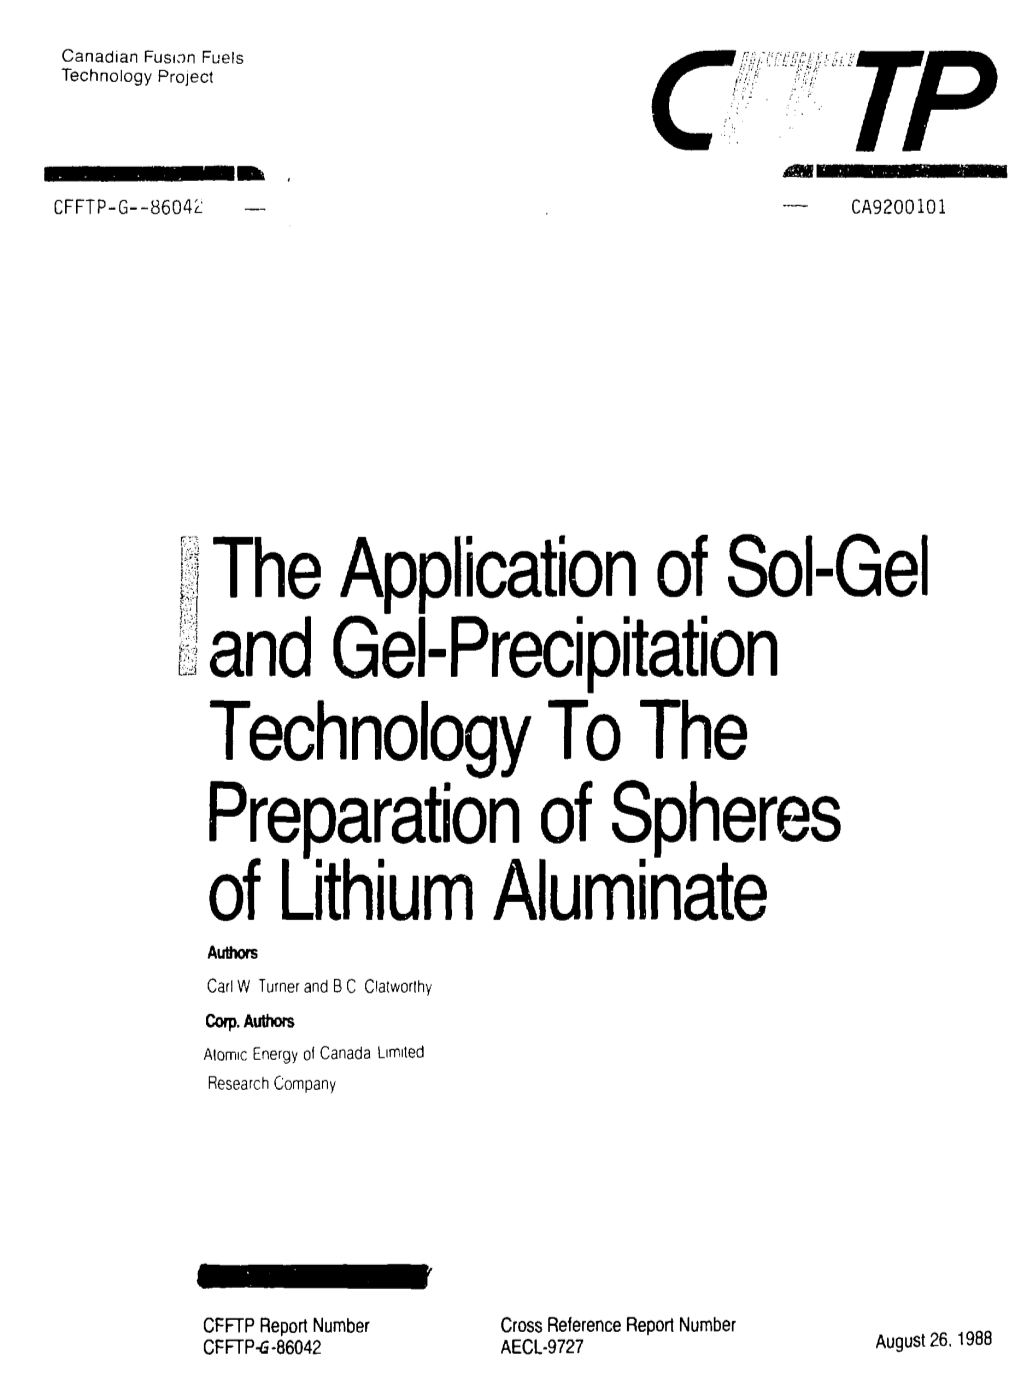 The Application of Sol-Gel and Ge -Precipitation Technology to the Preparation of Spheres of Lithium Aluminate Authors